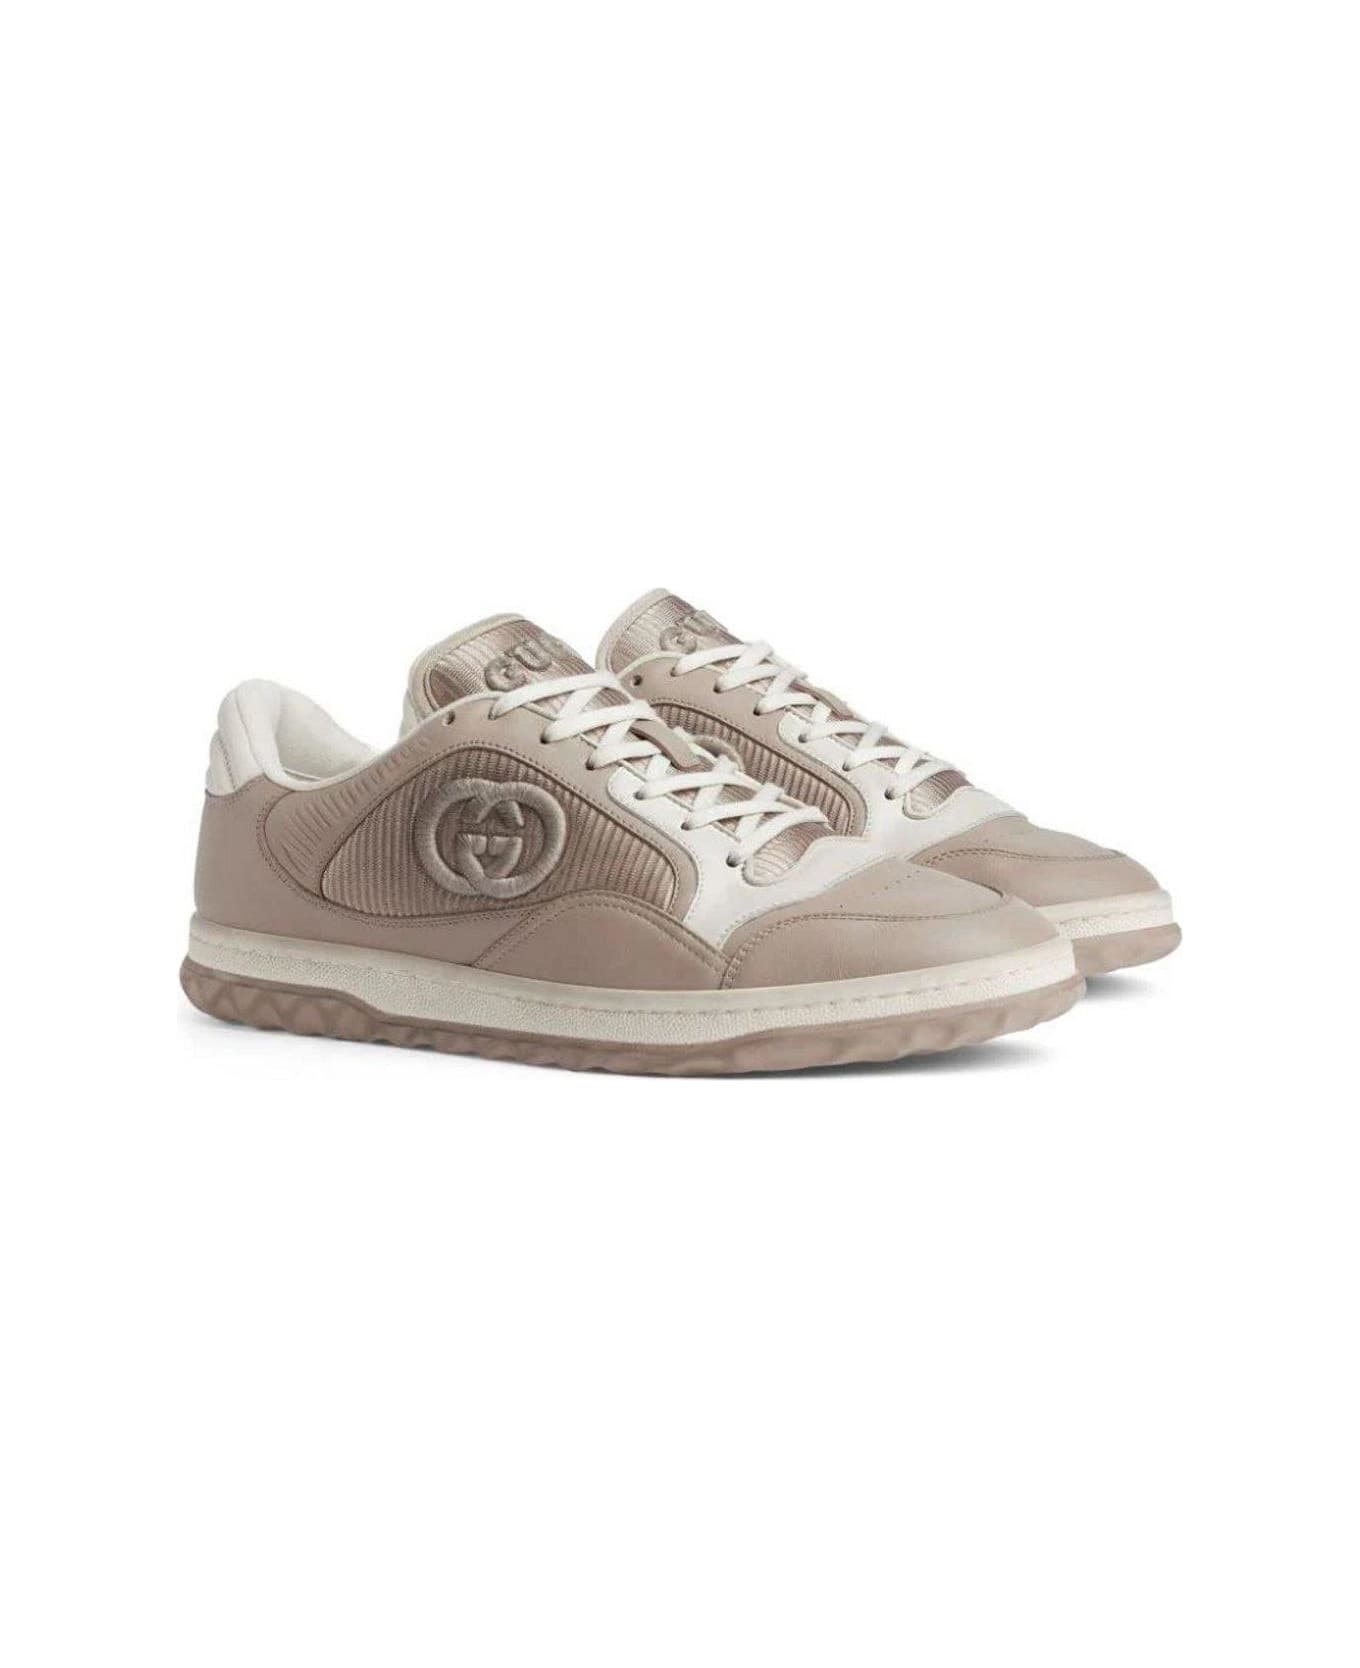 Gucci Logo Embroidered Low-top Sneakers - Oat スニーカー